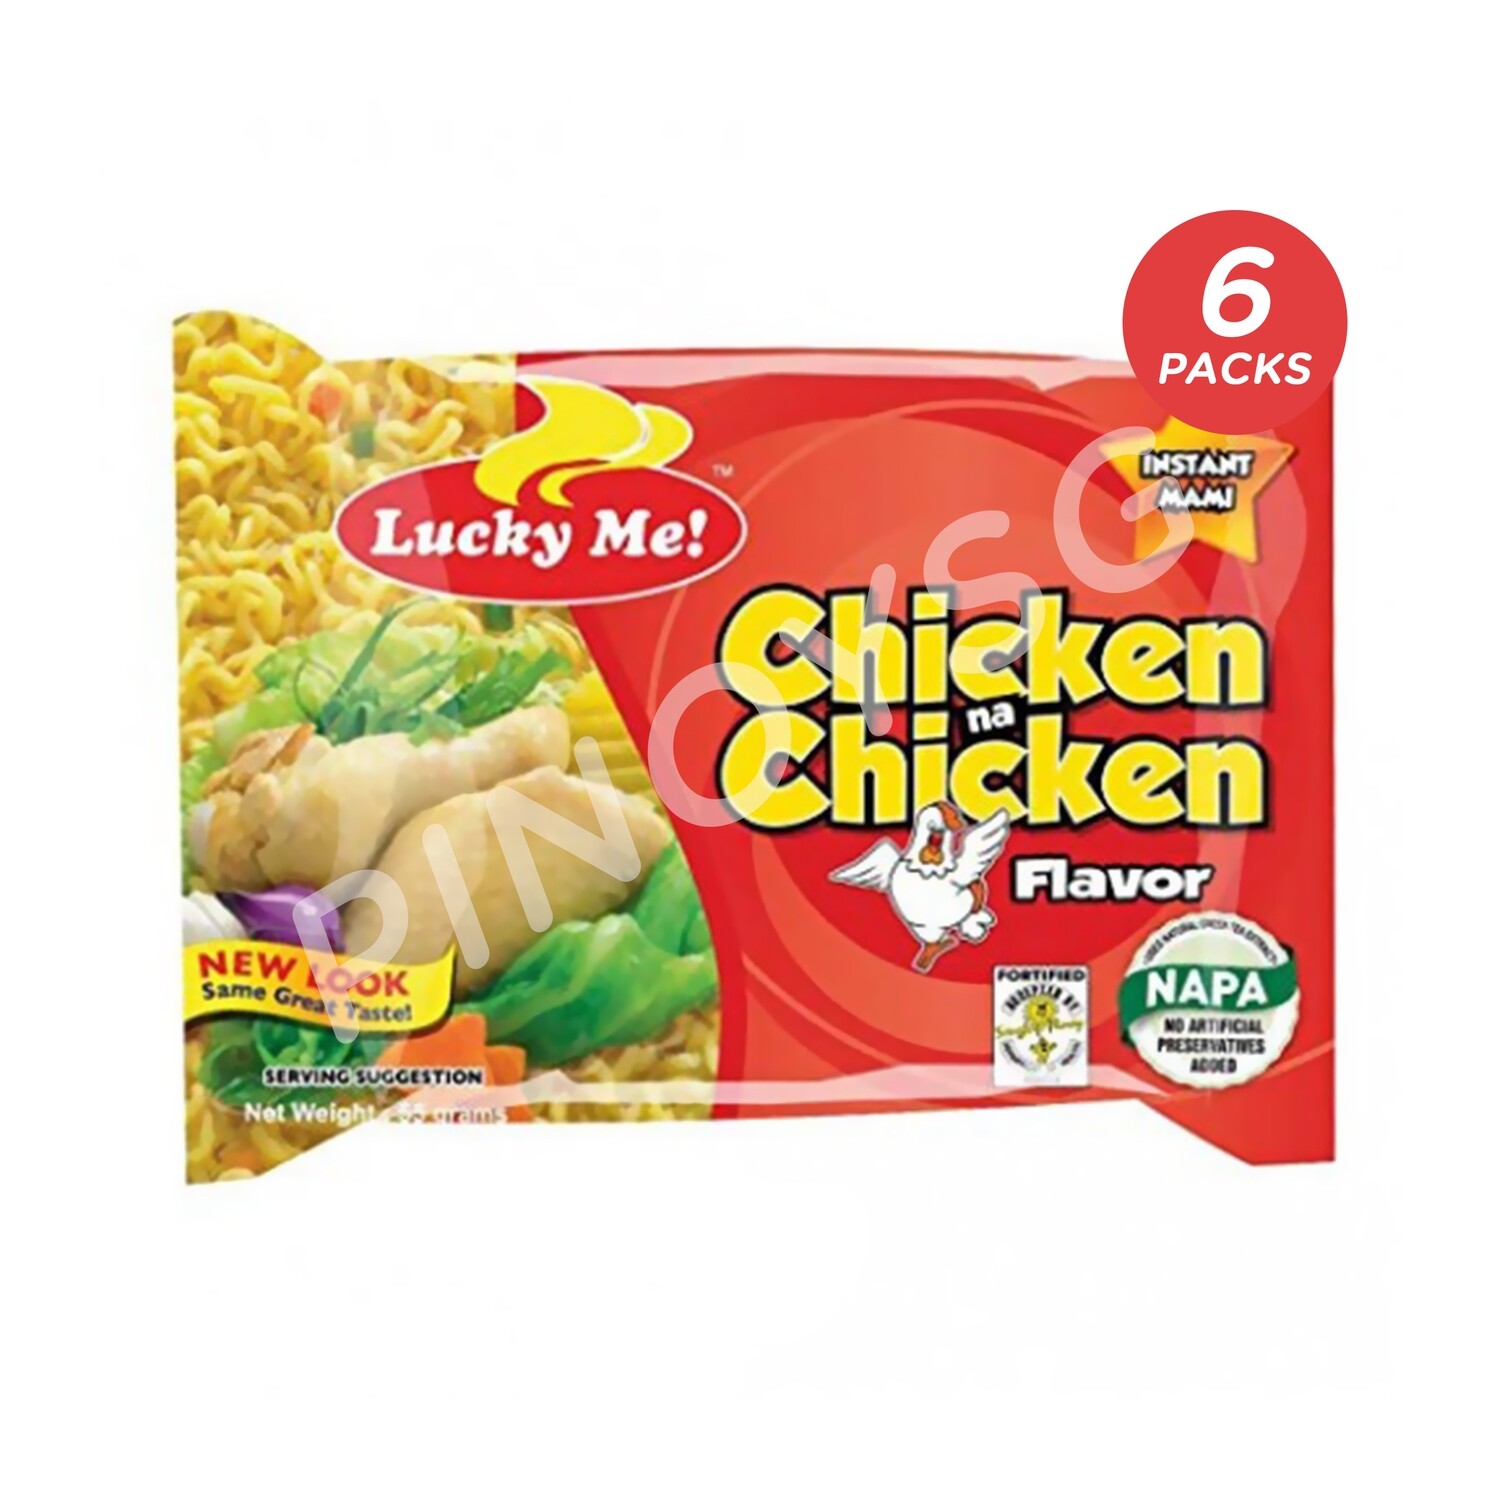 Lucky Me! Instant Noodle Chicken na Chicken, 1pc/55g